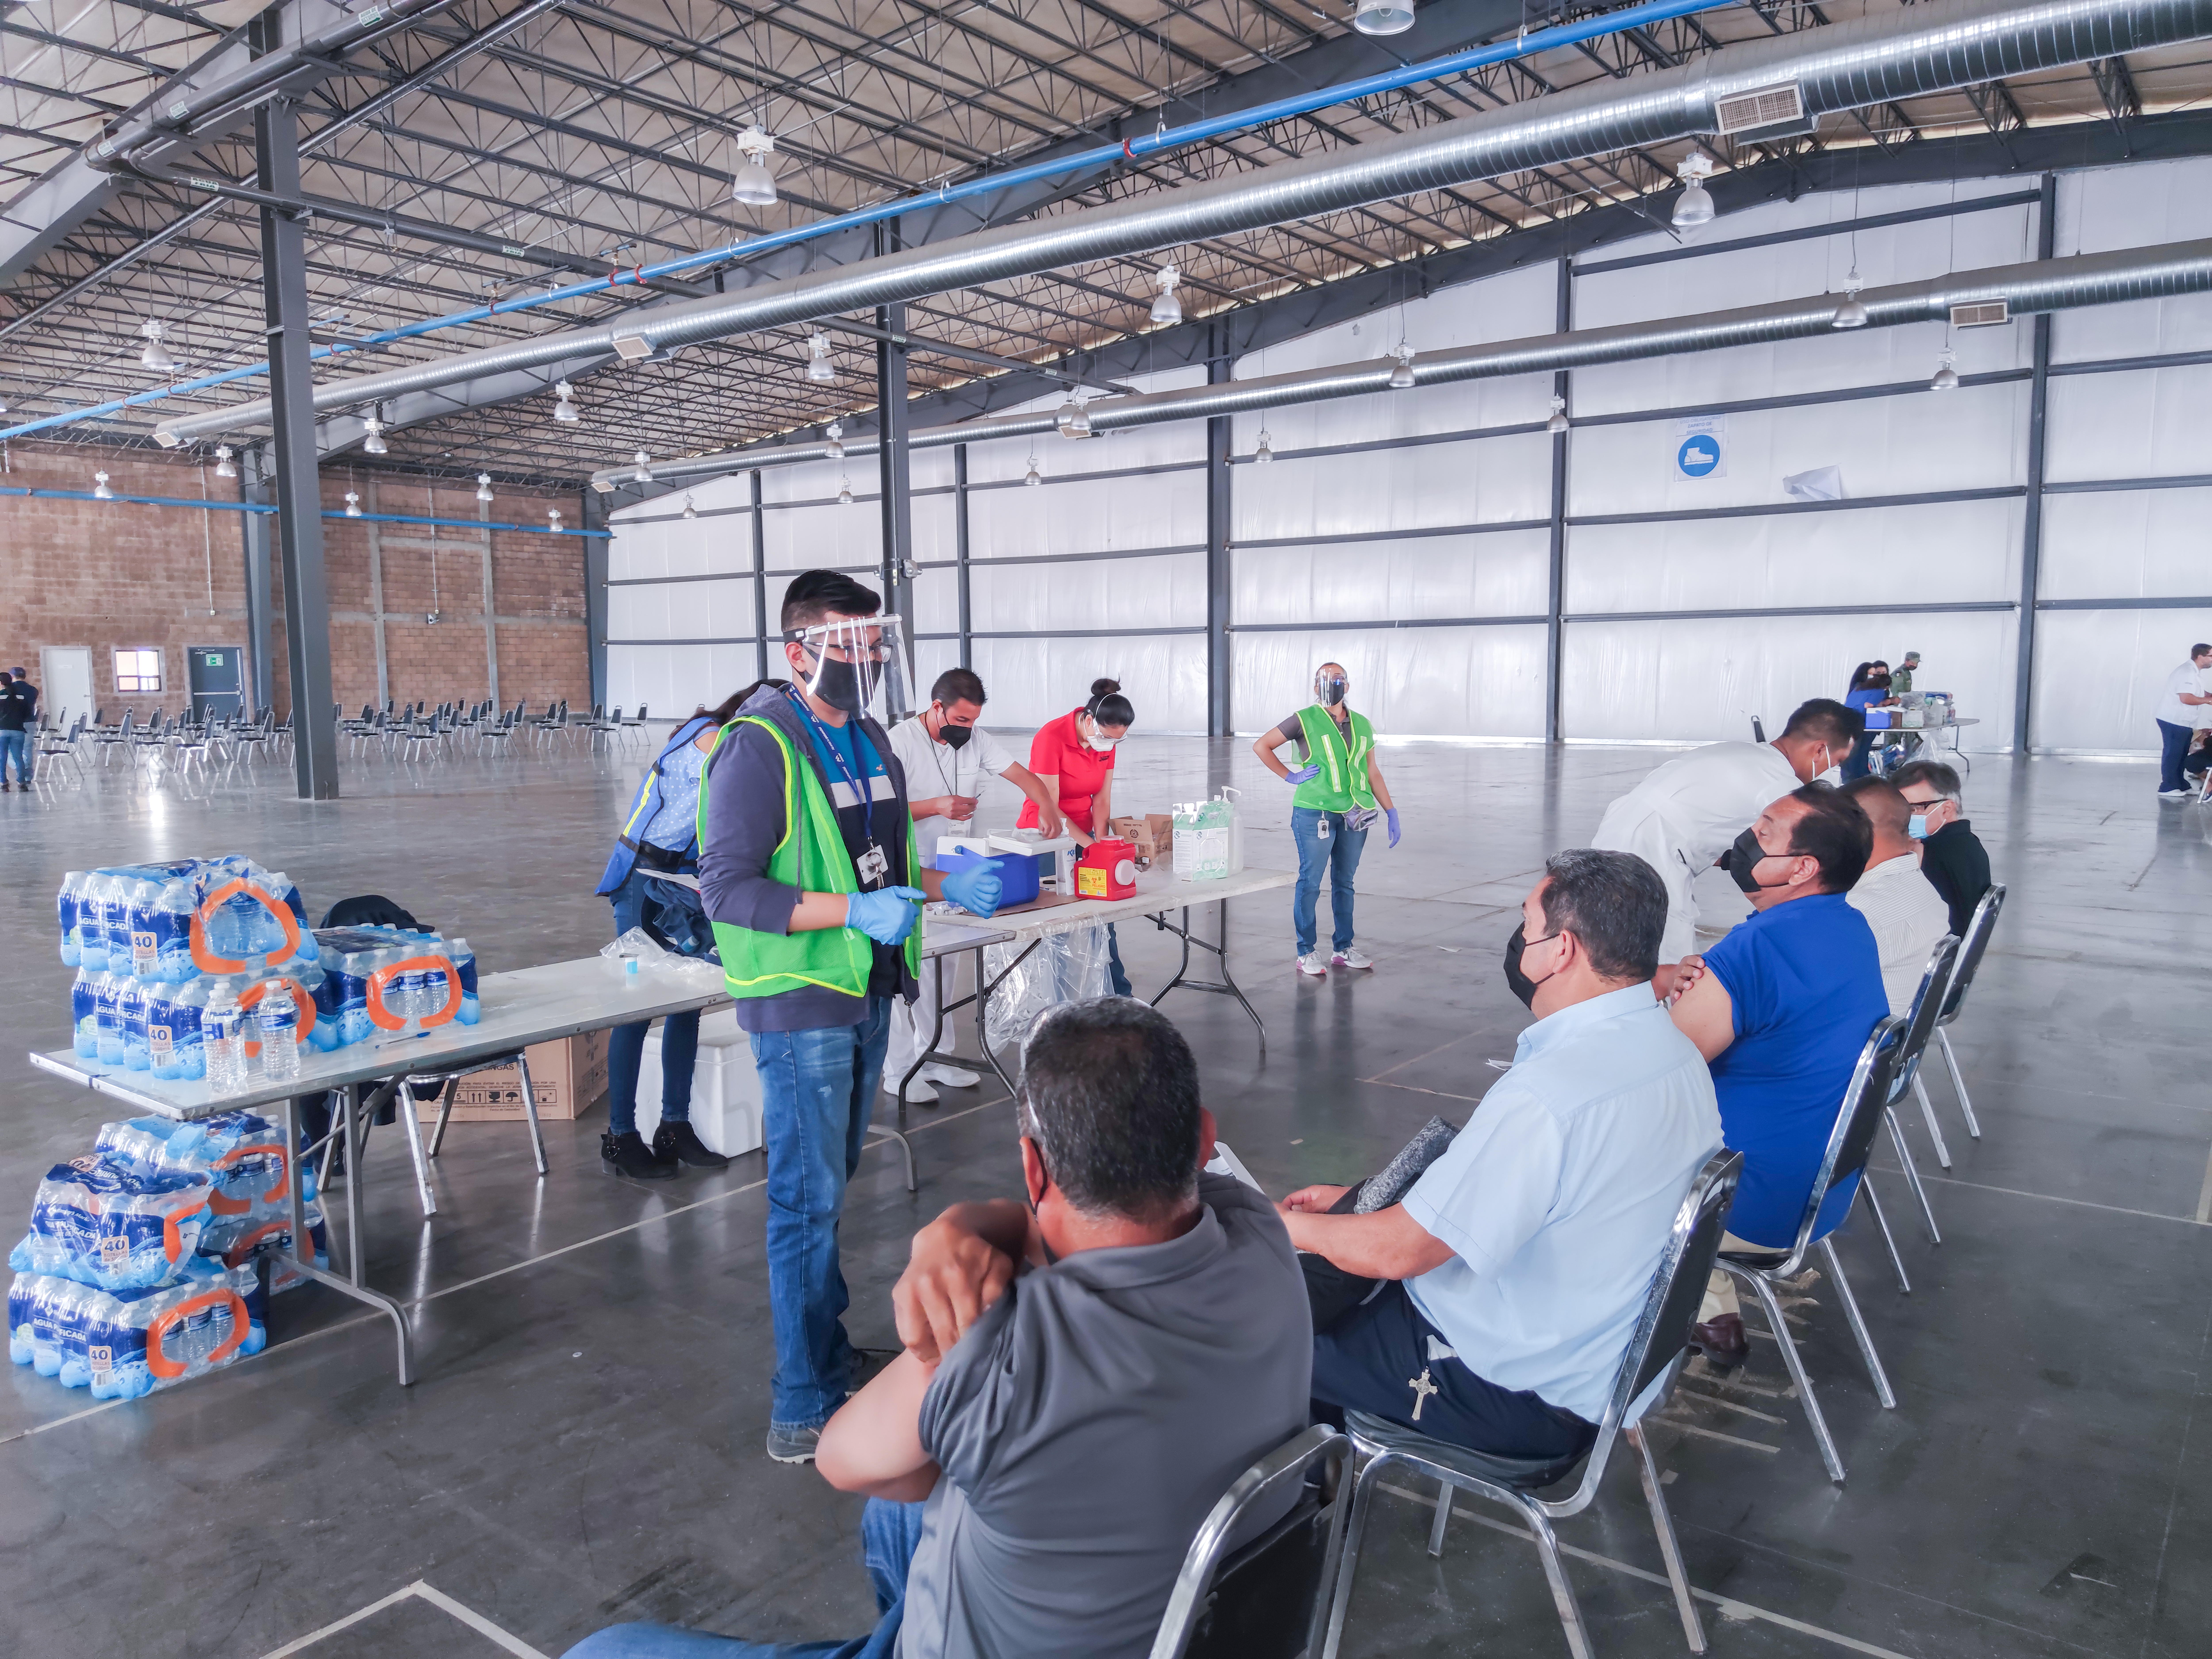 Tetakawi's COVID Vaccination Events Support Manufacturers and Communities in Mexico